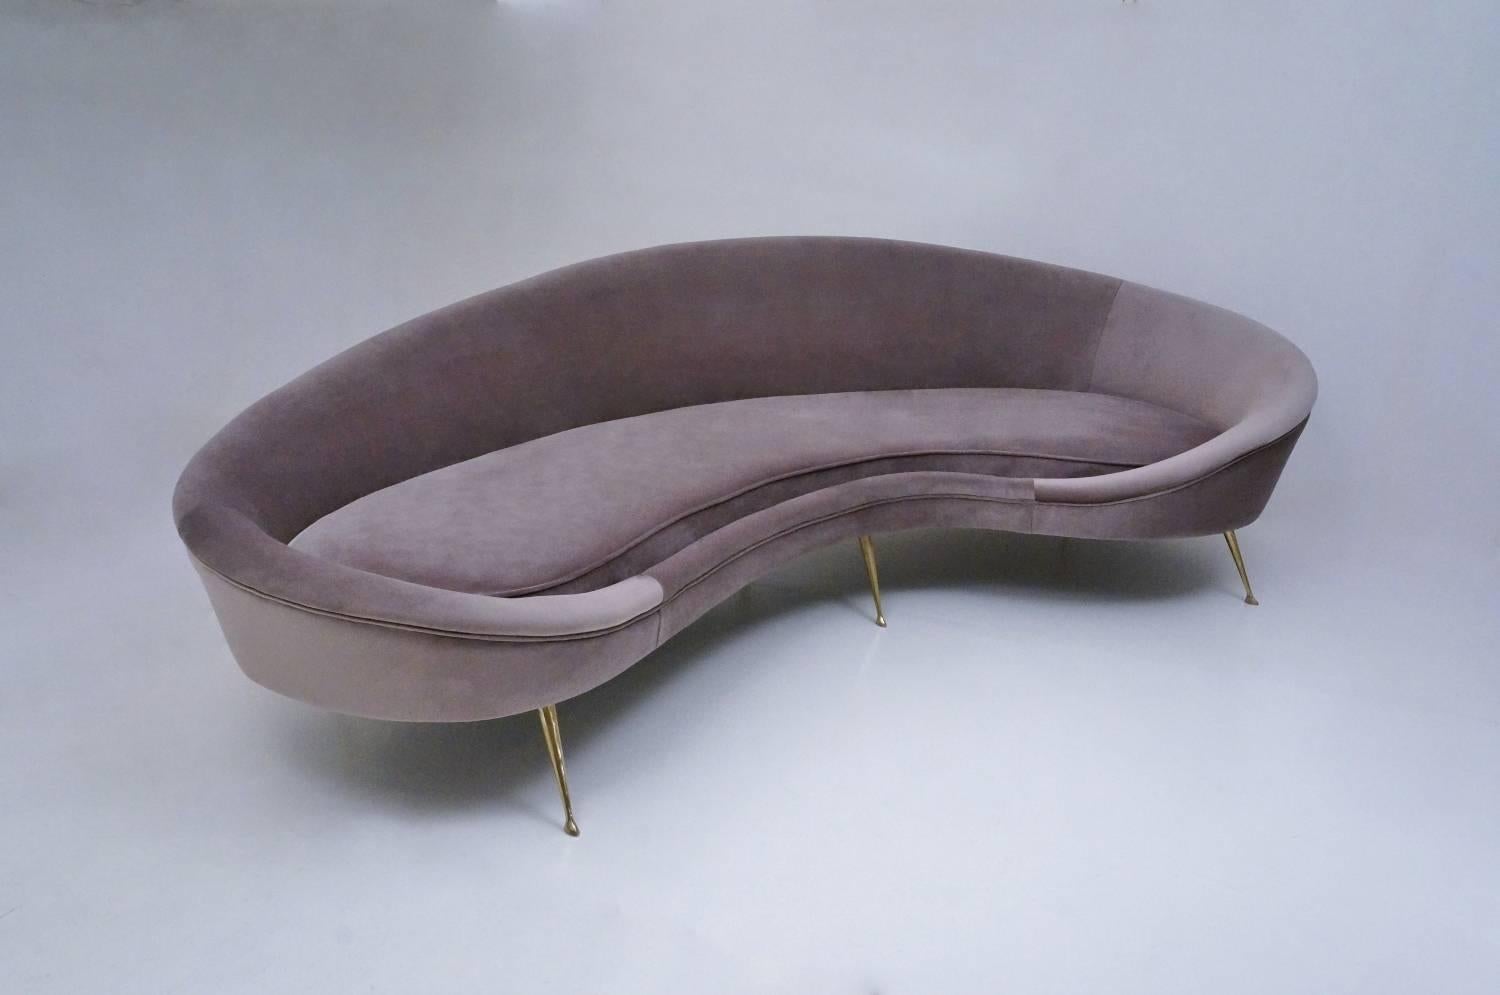 Ico Parisi sofa 1950s style in new velvet upholstery, Italian.

In new 'Greige' colour velvet upholstery with solid handmade brass legs, Italian. Made exclusively for Roomscape`s Contemporary Collection.

Ico Parisi`s 'Comma' sofa is the 20th